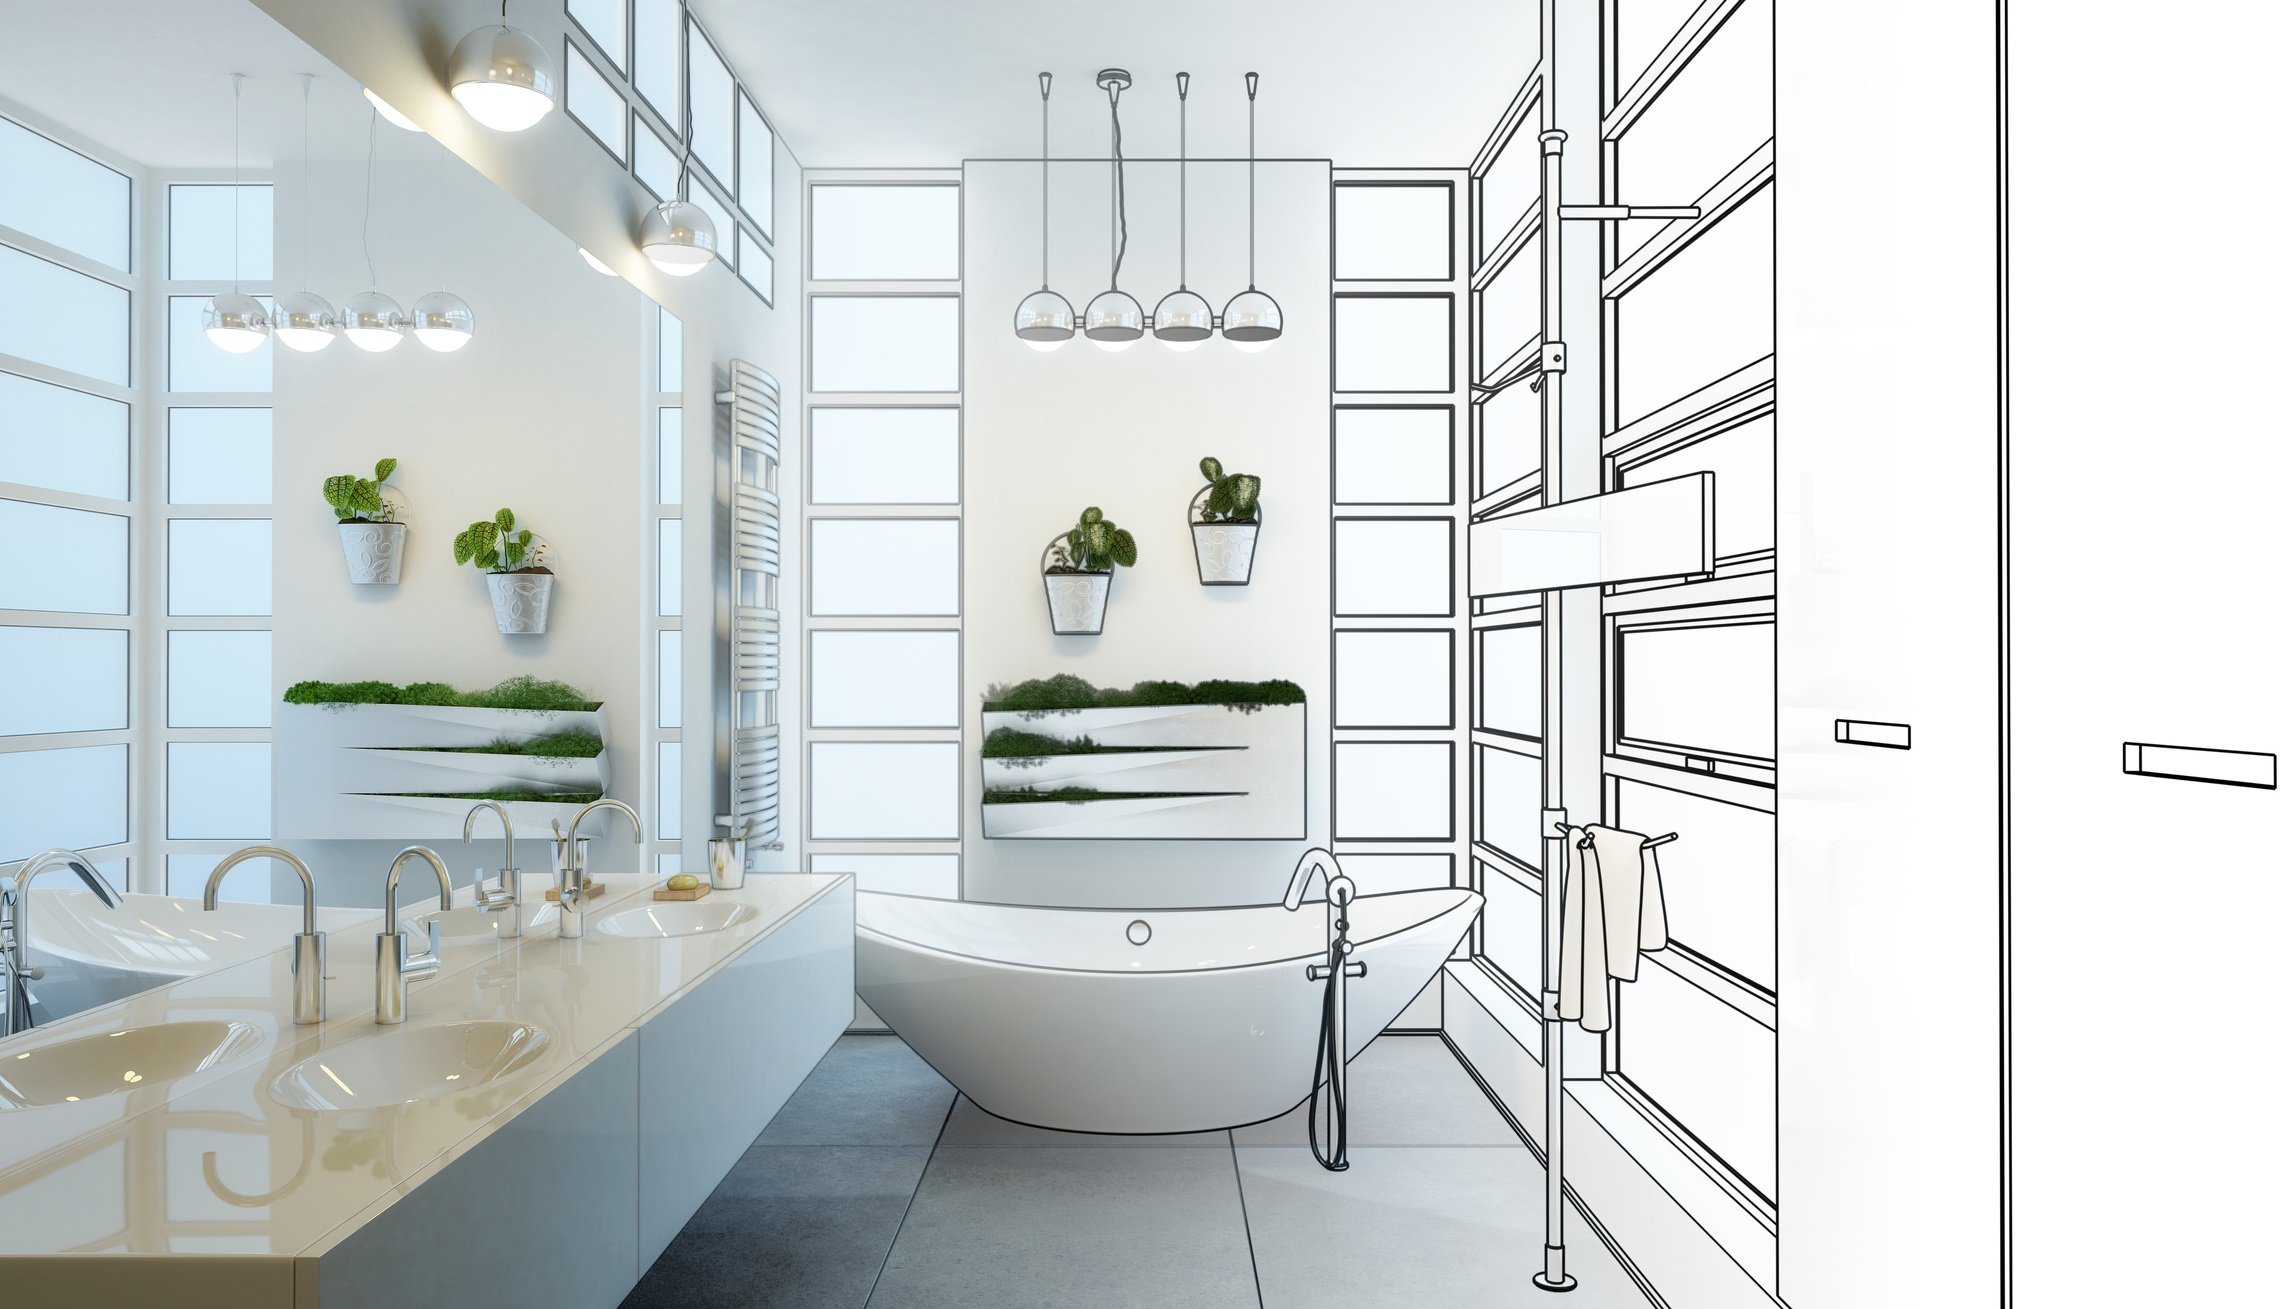 Residential restroom design with a contemporary adaptation, half-drawn and half-completed